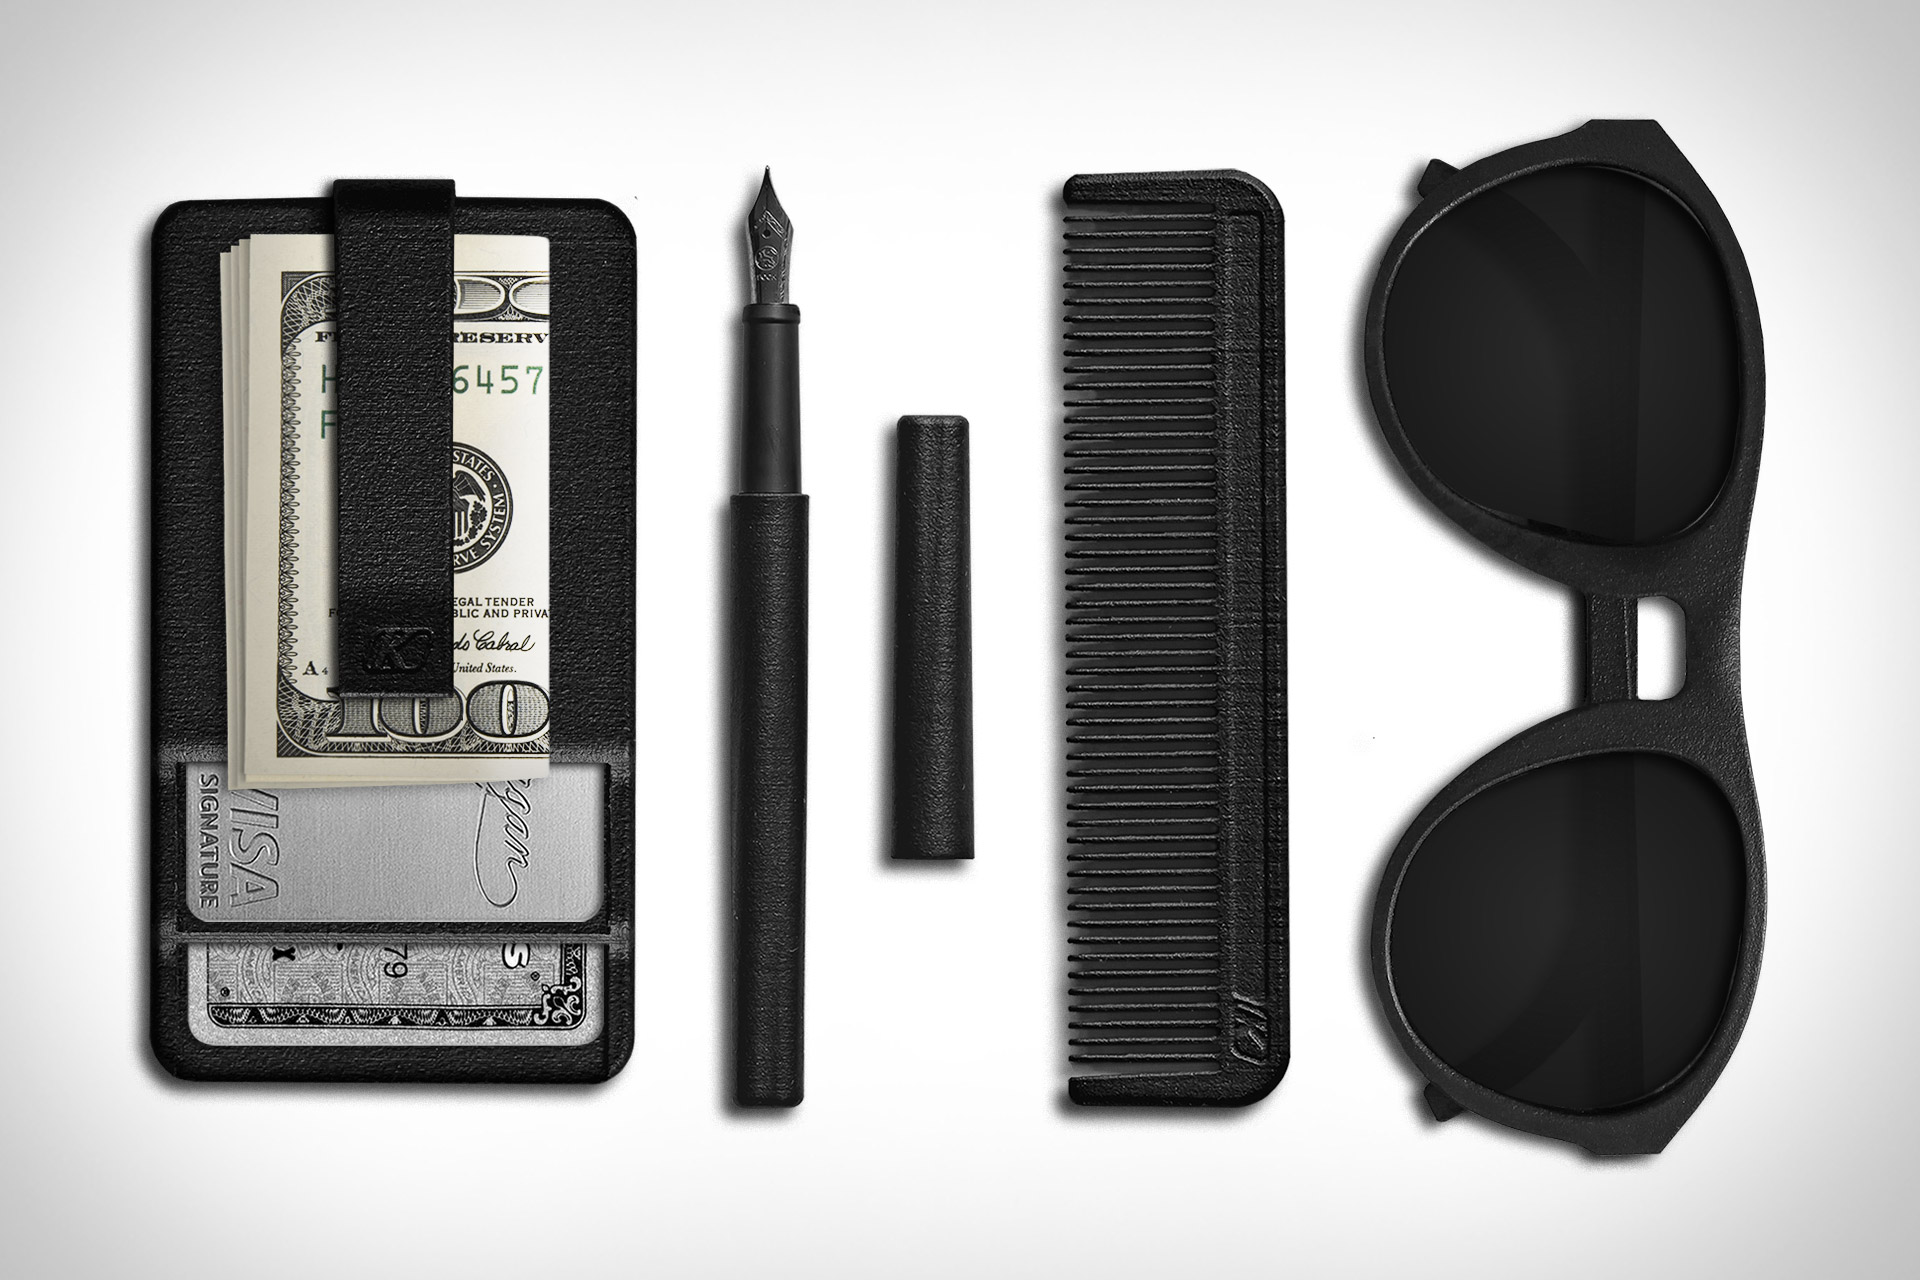 Everyday Carry: Engineered | Uncrate, #Everyday #Carry #Engineered #Uncrate